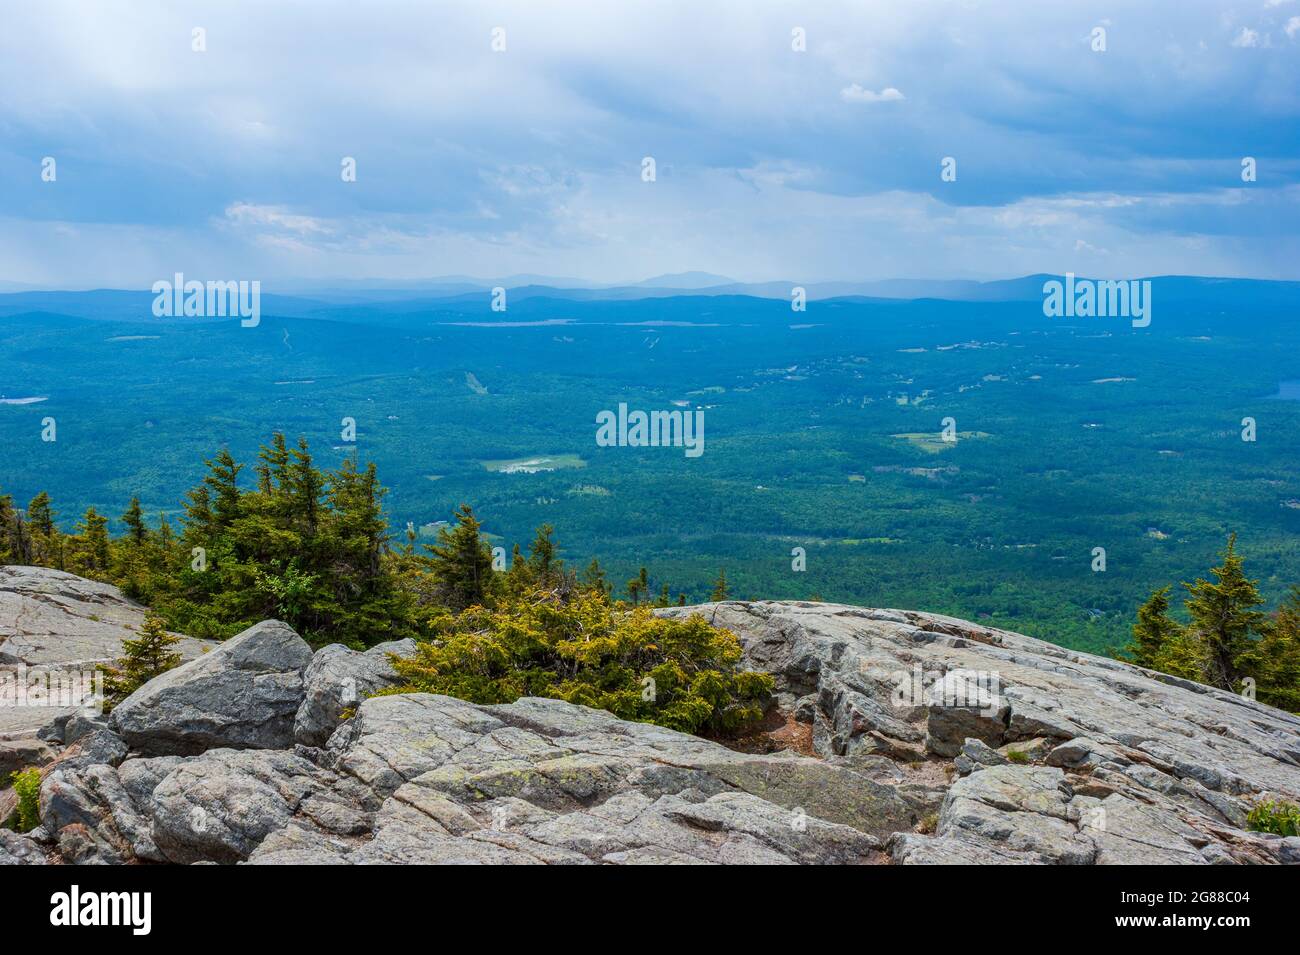 Western view from Mt. Kearsarge summit towards Lake Sunapee and Mt. Ascutney. Rocky granite outcrop and stunted spruce trees. Distant peaks and ridges Stock Photo